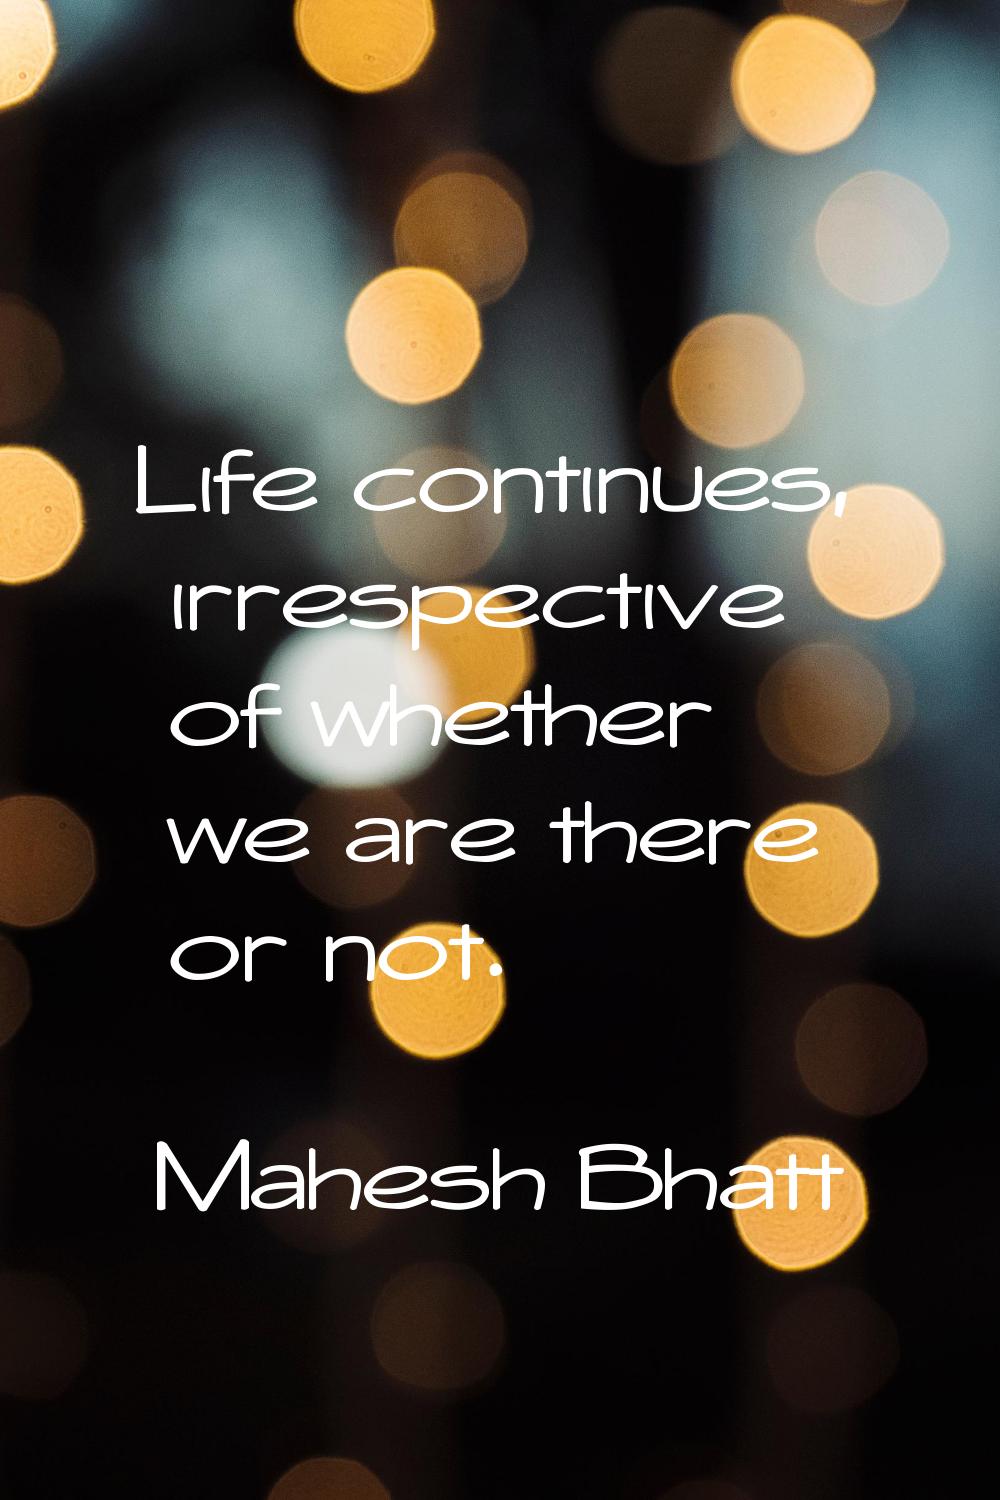 Life continues, irrespective of whether we are there or not.